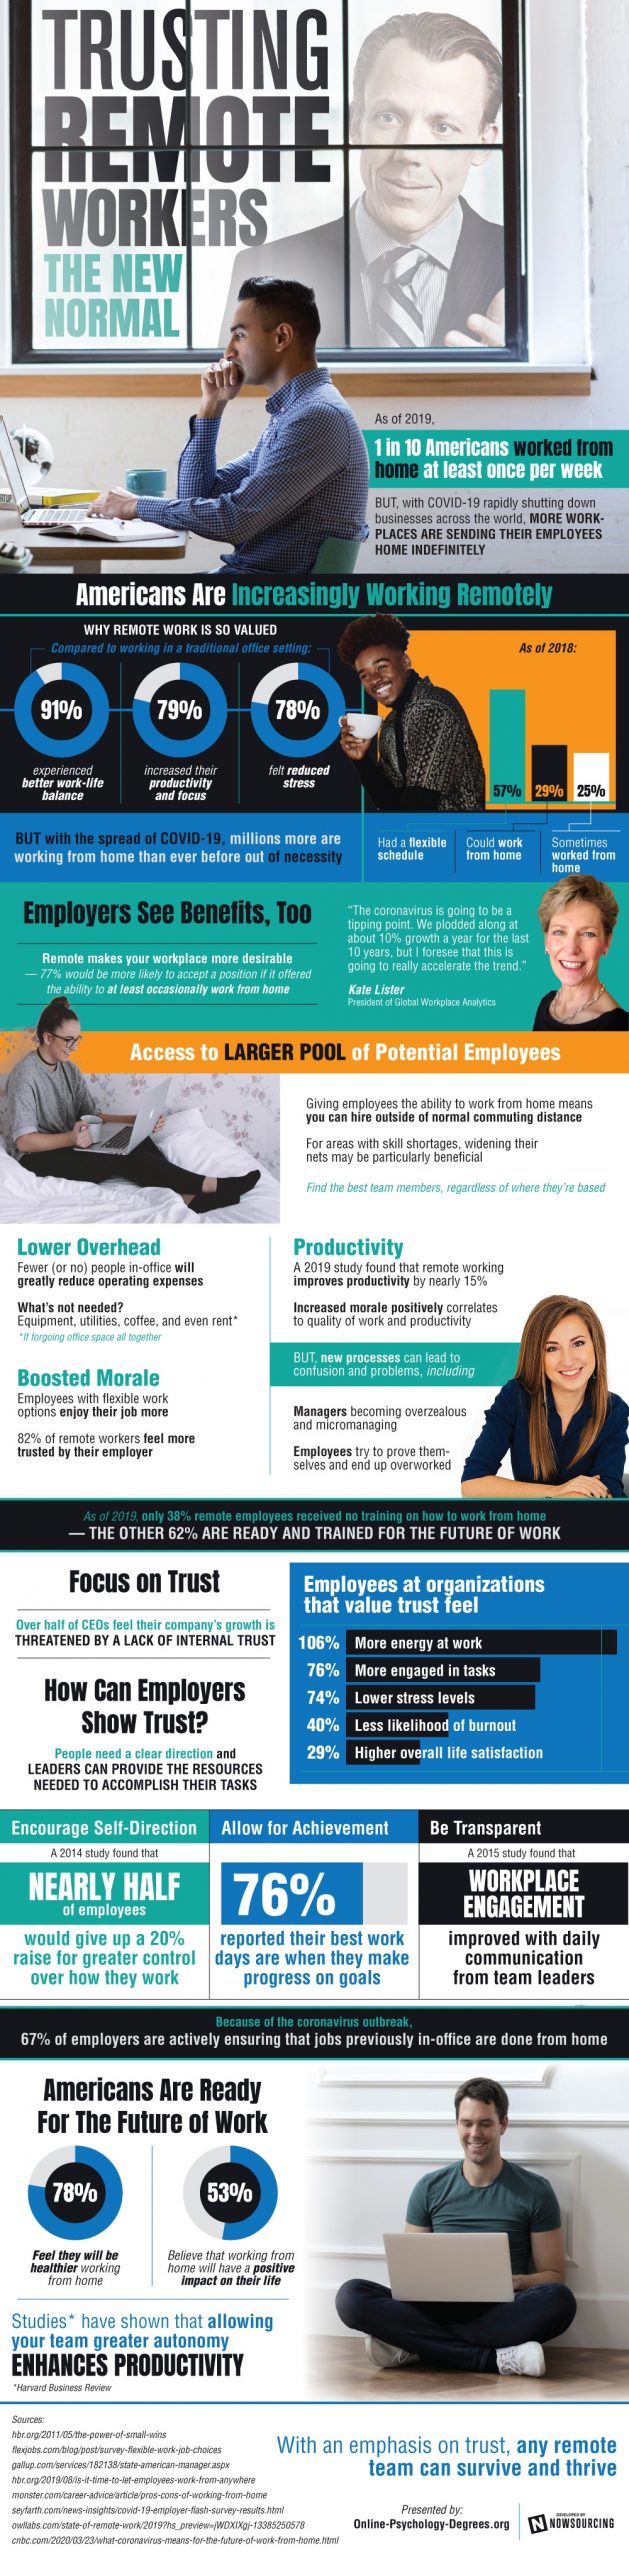 The Psychology of Trusting Remote Workers [Infographic] | DeviceDaily.com